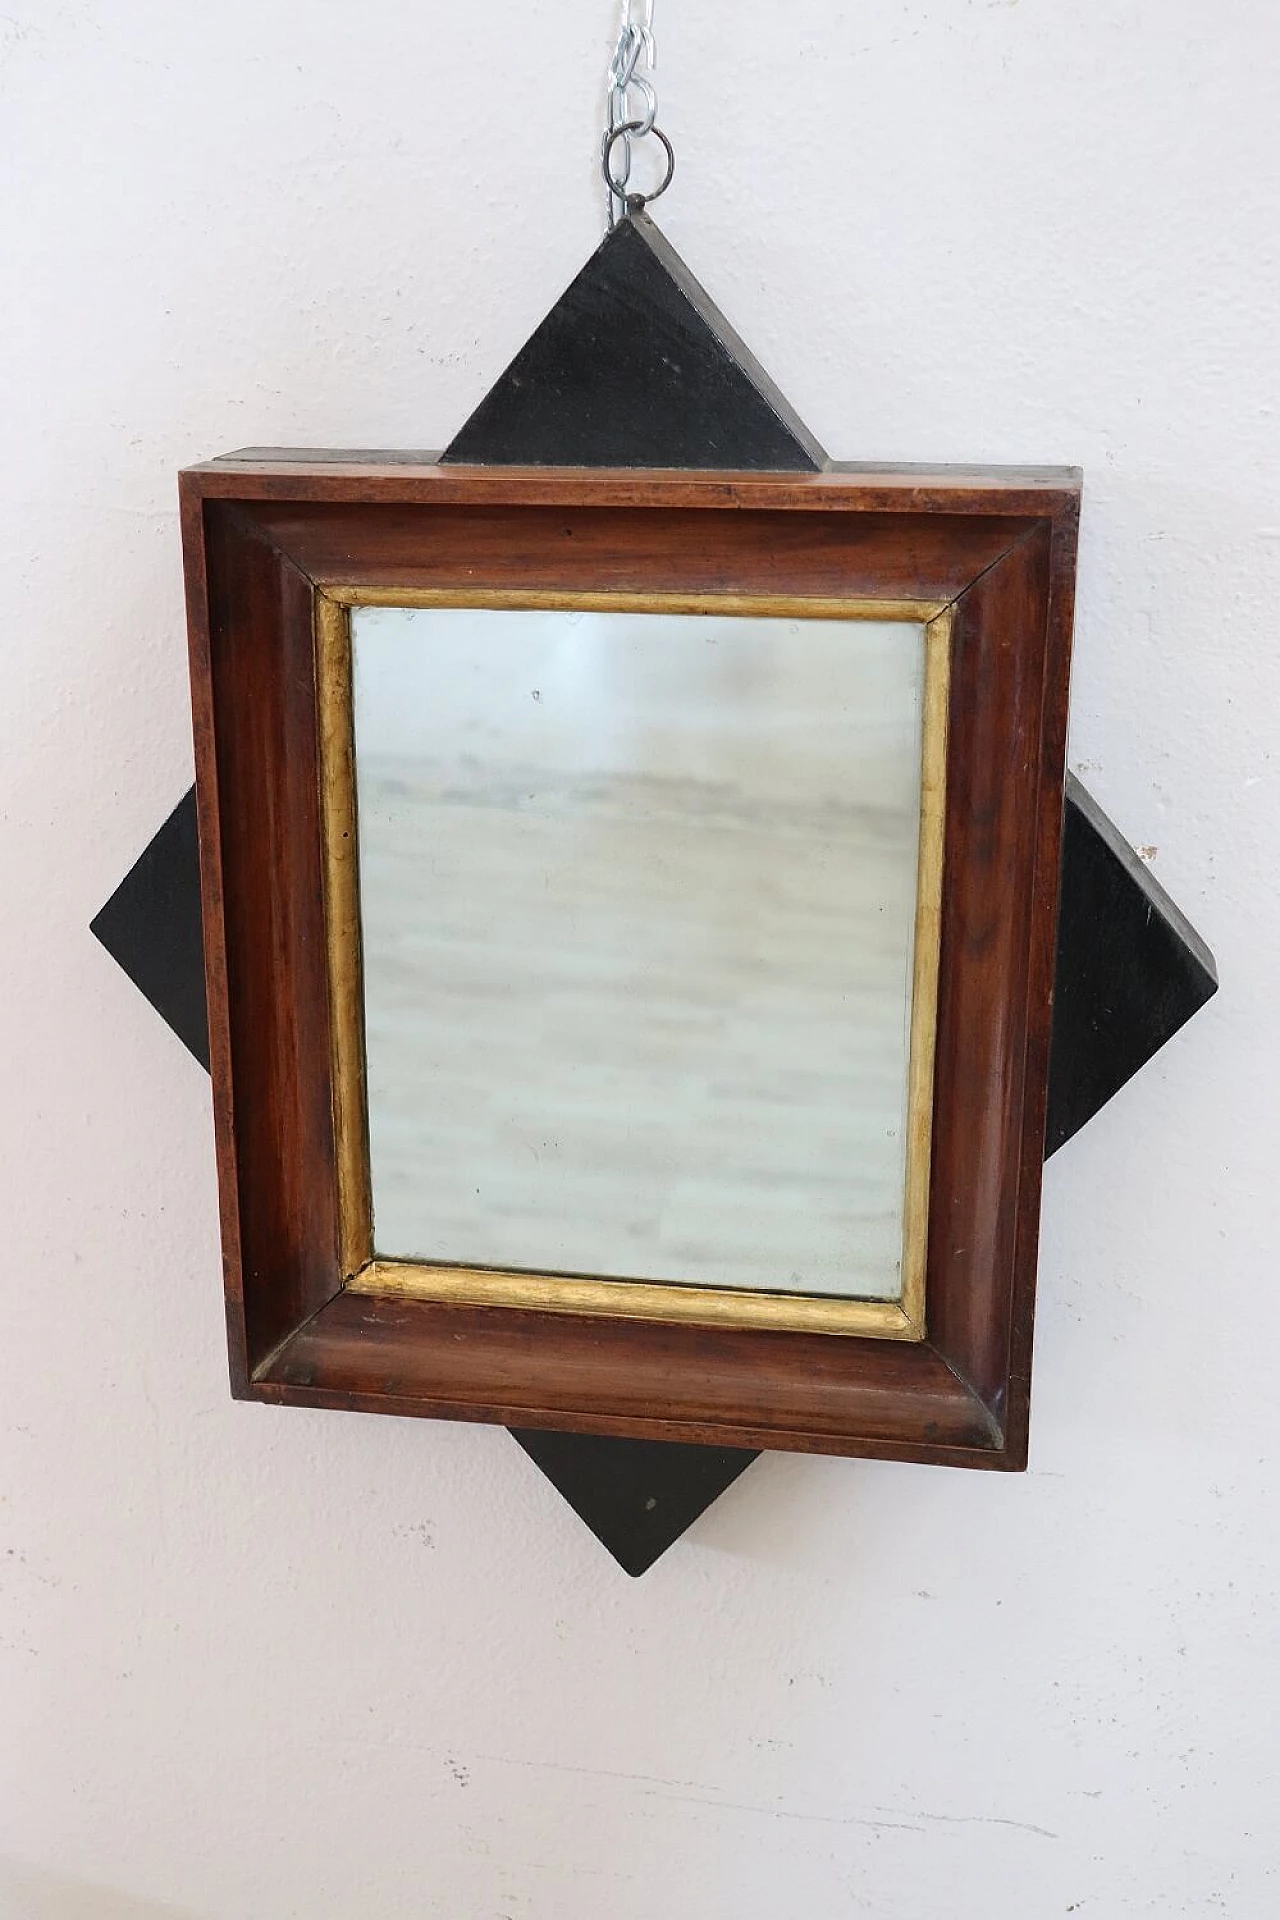 Walnut mirror with star-shaped frame, early 19th century 2